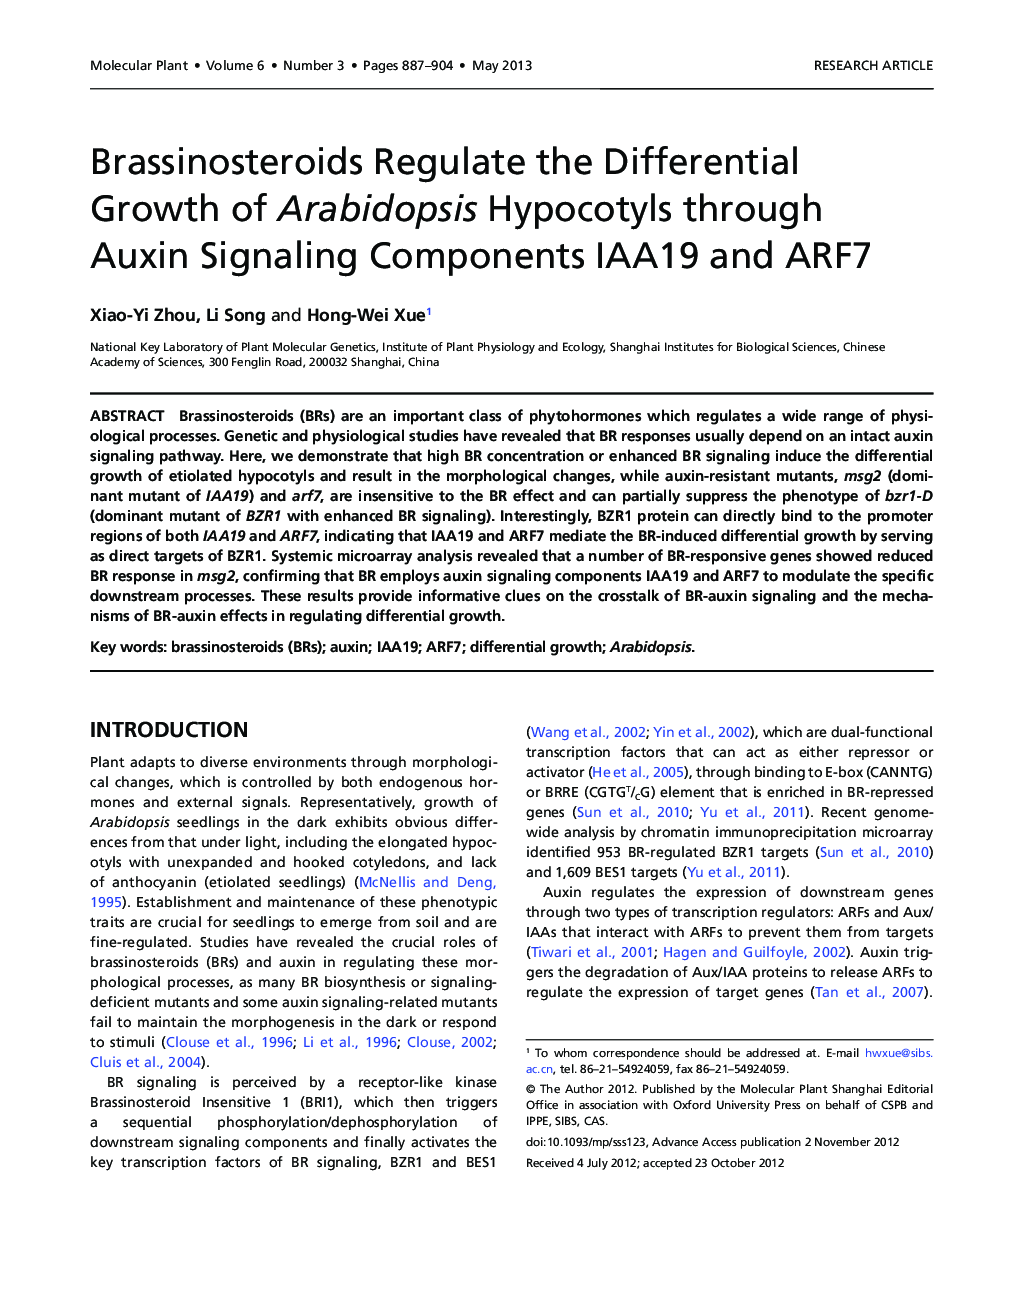 Brassinosteroids Regulate the Differential Growth of Arabidopsis Hypocotyls through Auxin Signaling Components IAA19 and ARF7 